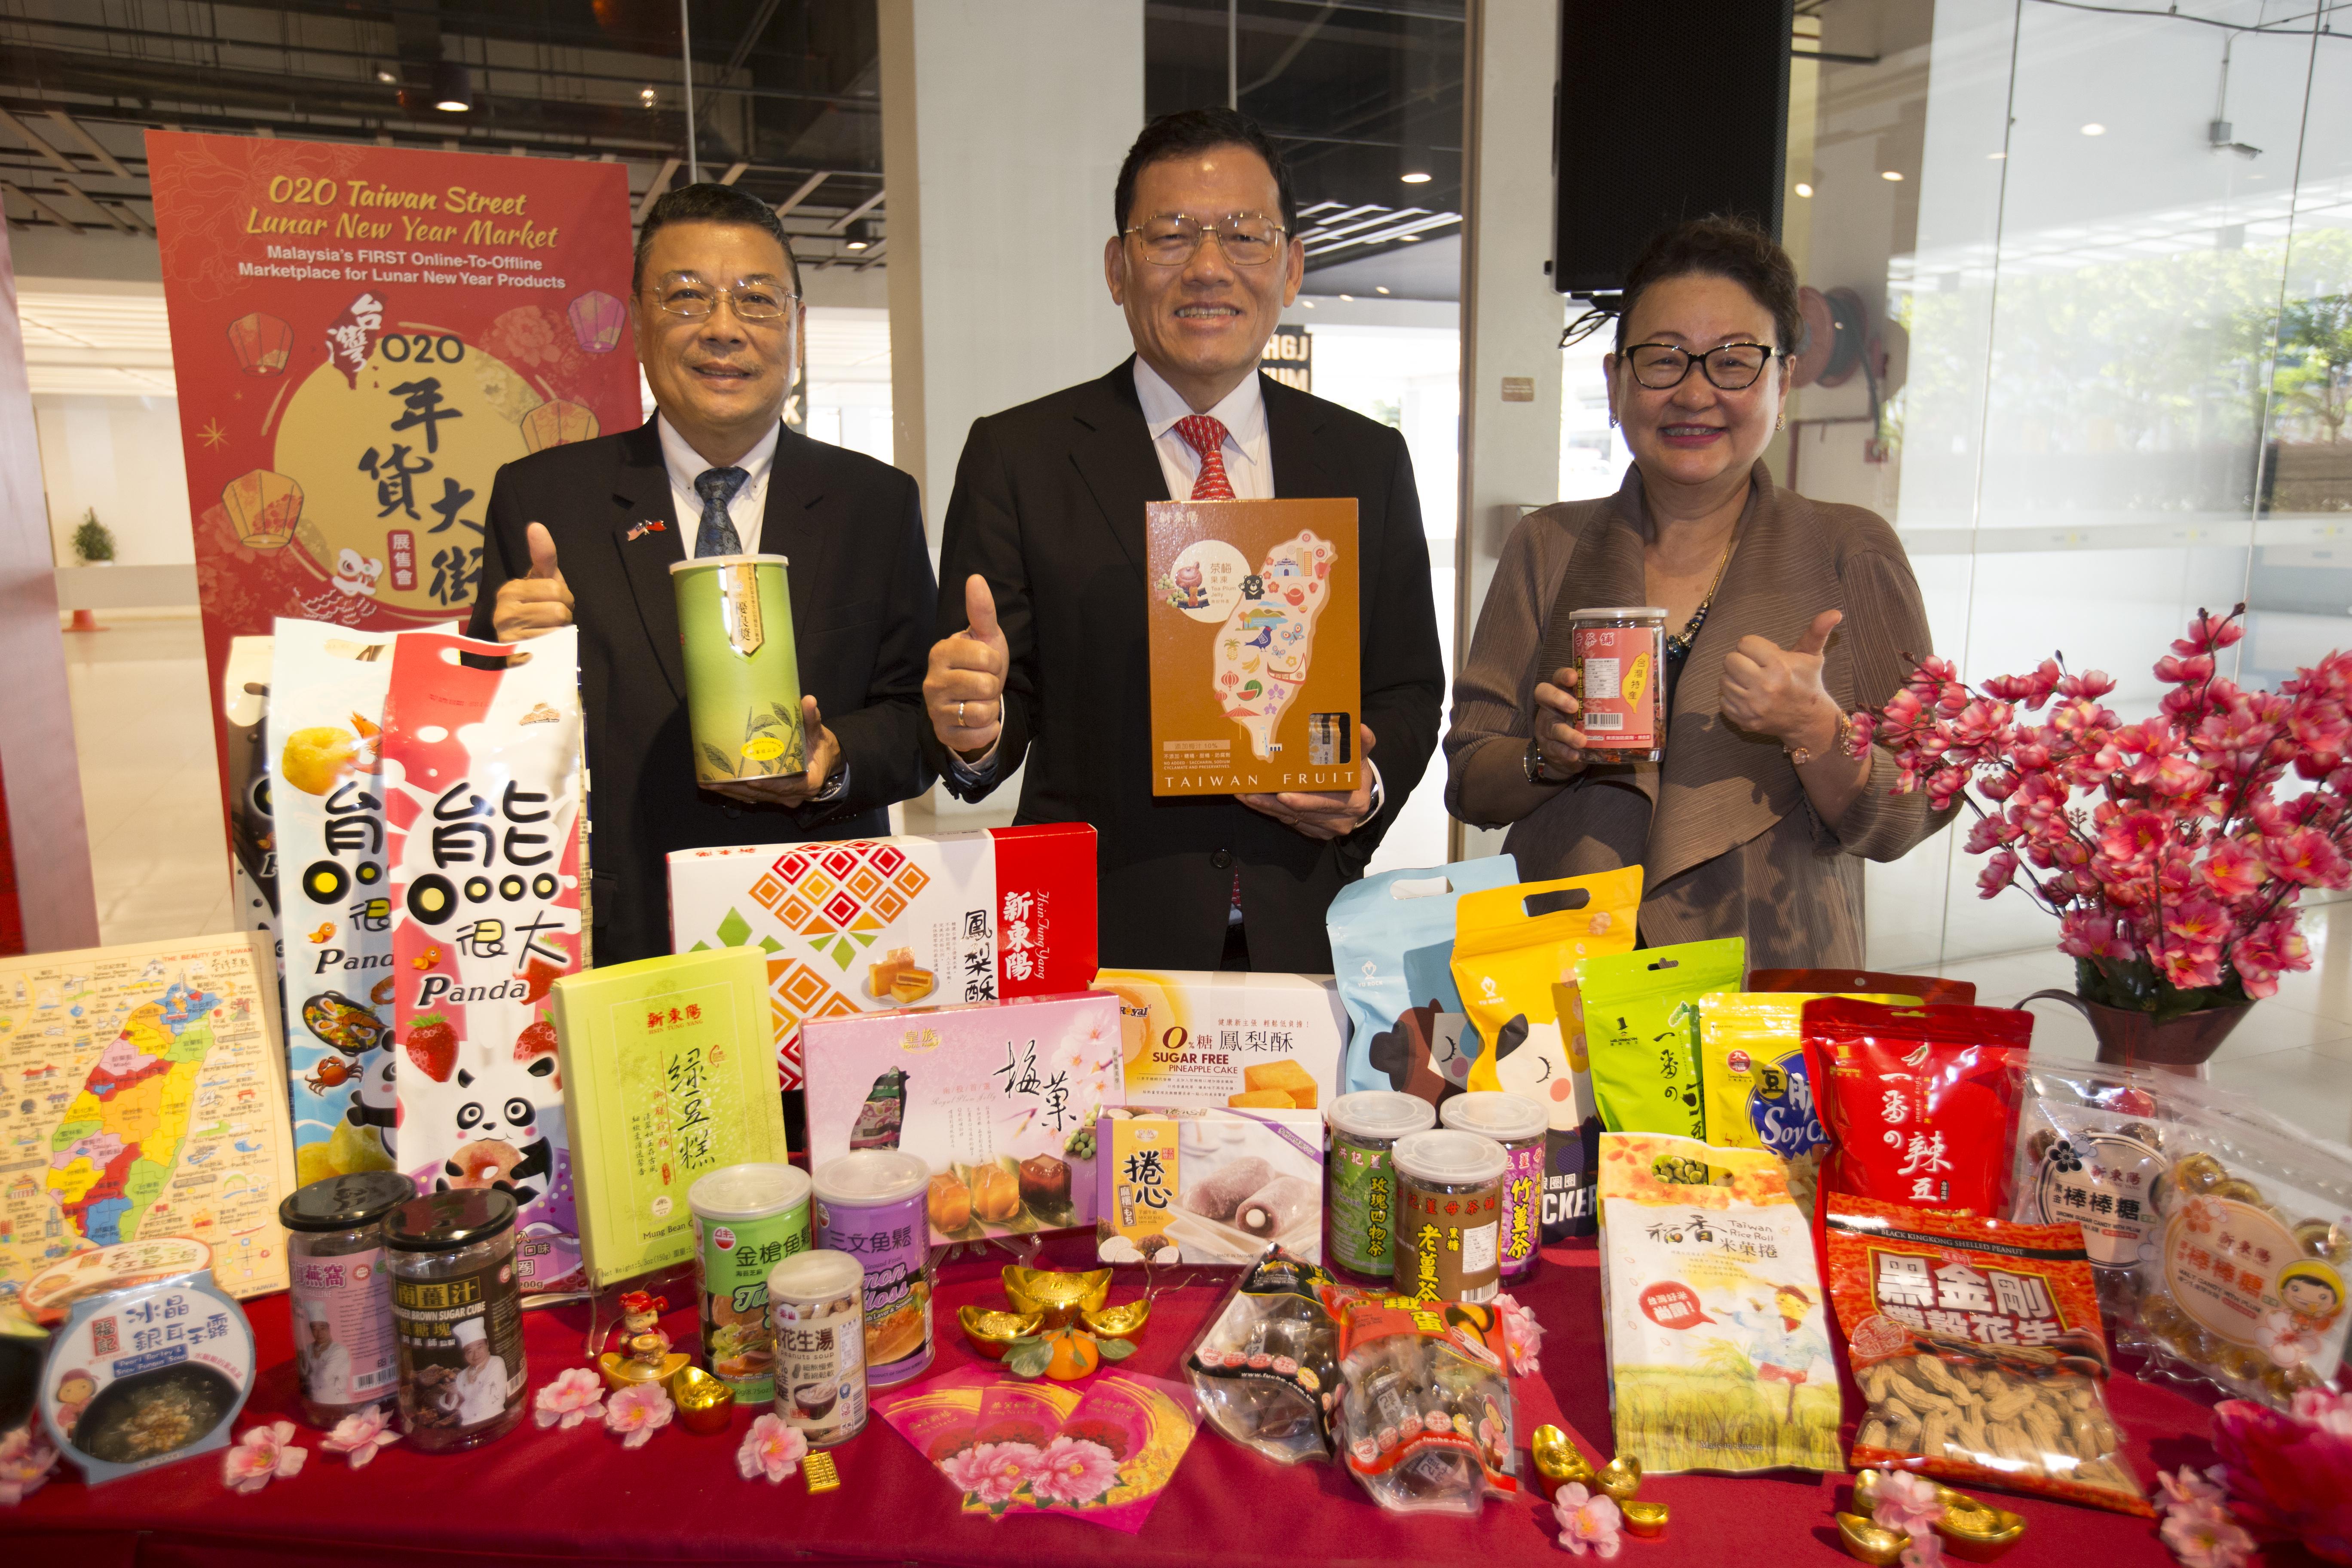  Representative Chang, James Chi-ping, Dato’ Joyce Yap, Chief Executive Officer of Retail, Pavilion REIT Malls, and Mr. Dave Lin, President of Taipei Investors’ Association in Malaysia attend the press release ceremony of “O2O Taiwan street – Lunar New Year Market) in Kuala Lumpur on January 23, 2018
